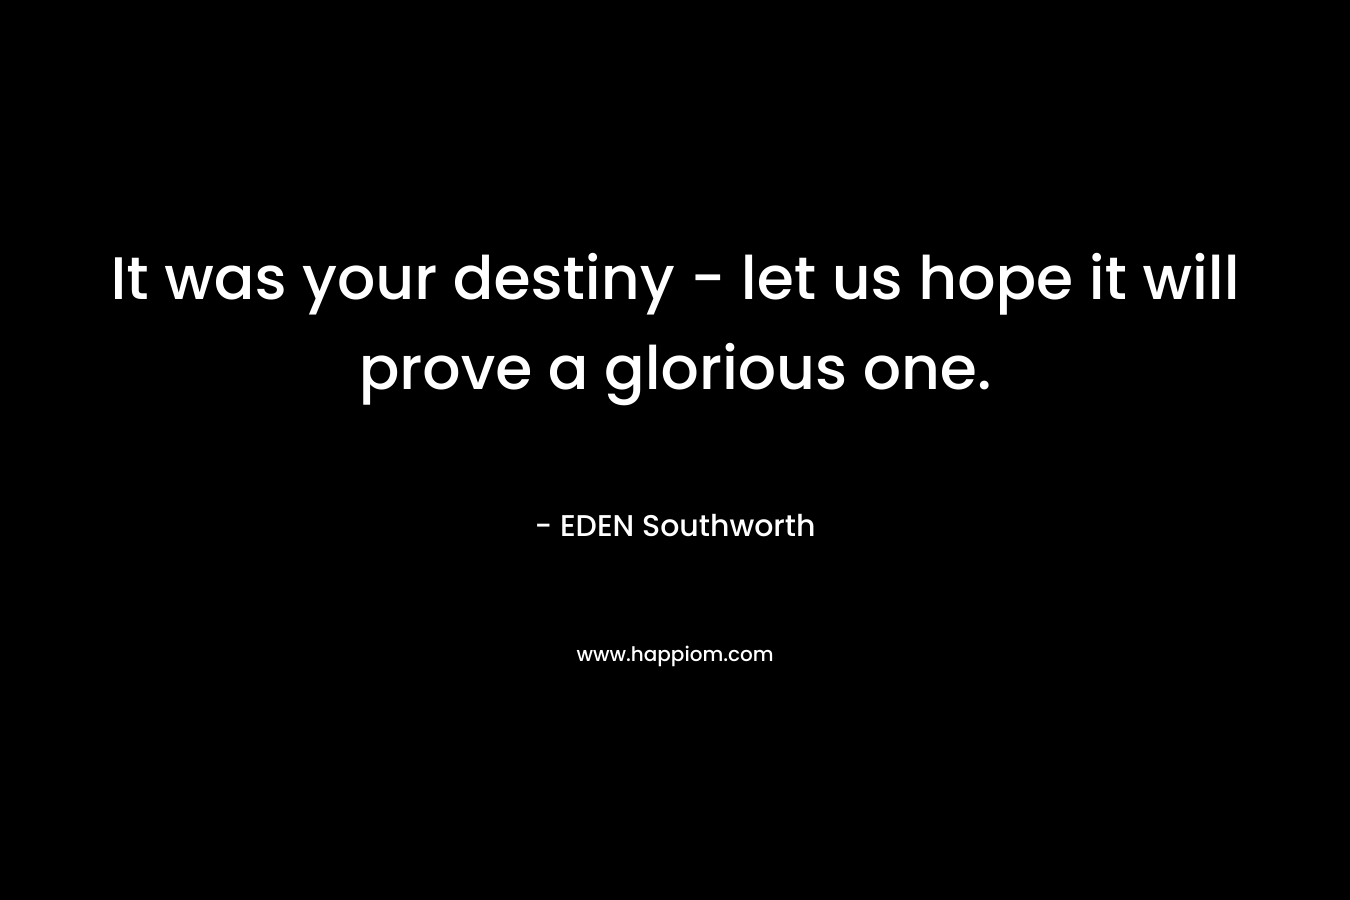 It was your destiny - let us hope it will prove a glorious one.